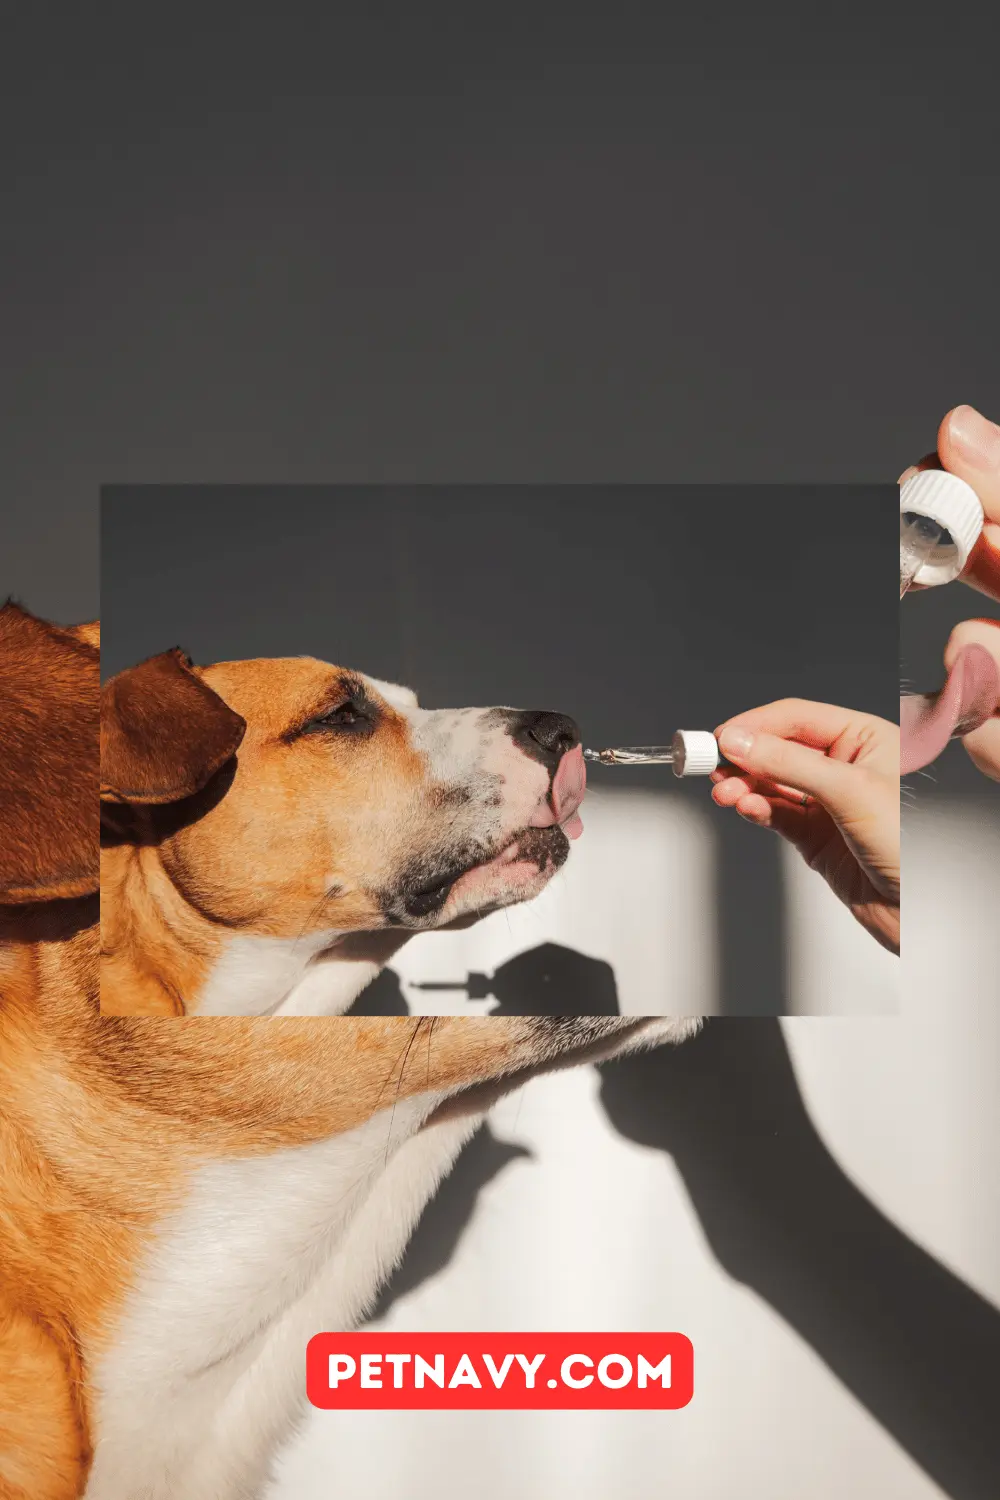 Joint Supplements for Dogs: Uses, Side Effects and More